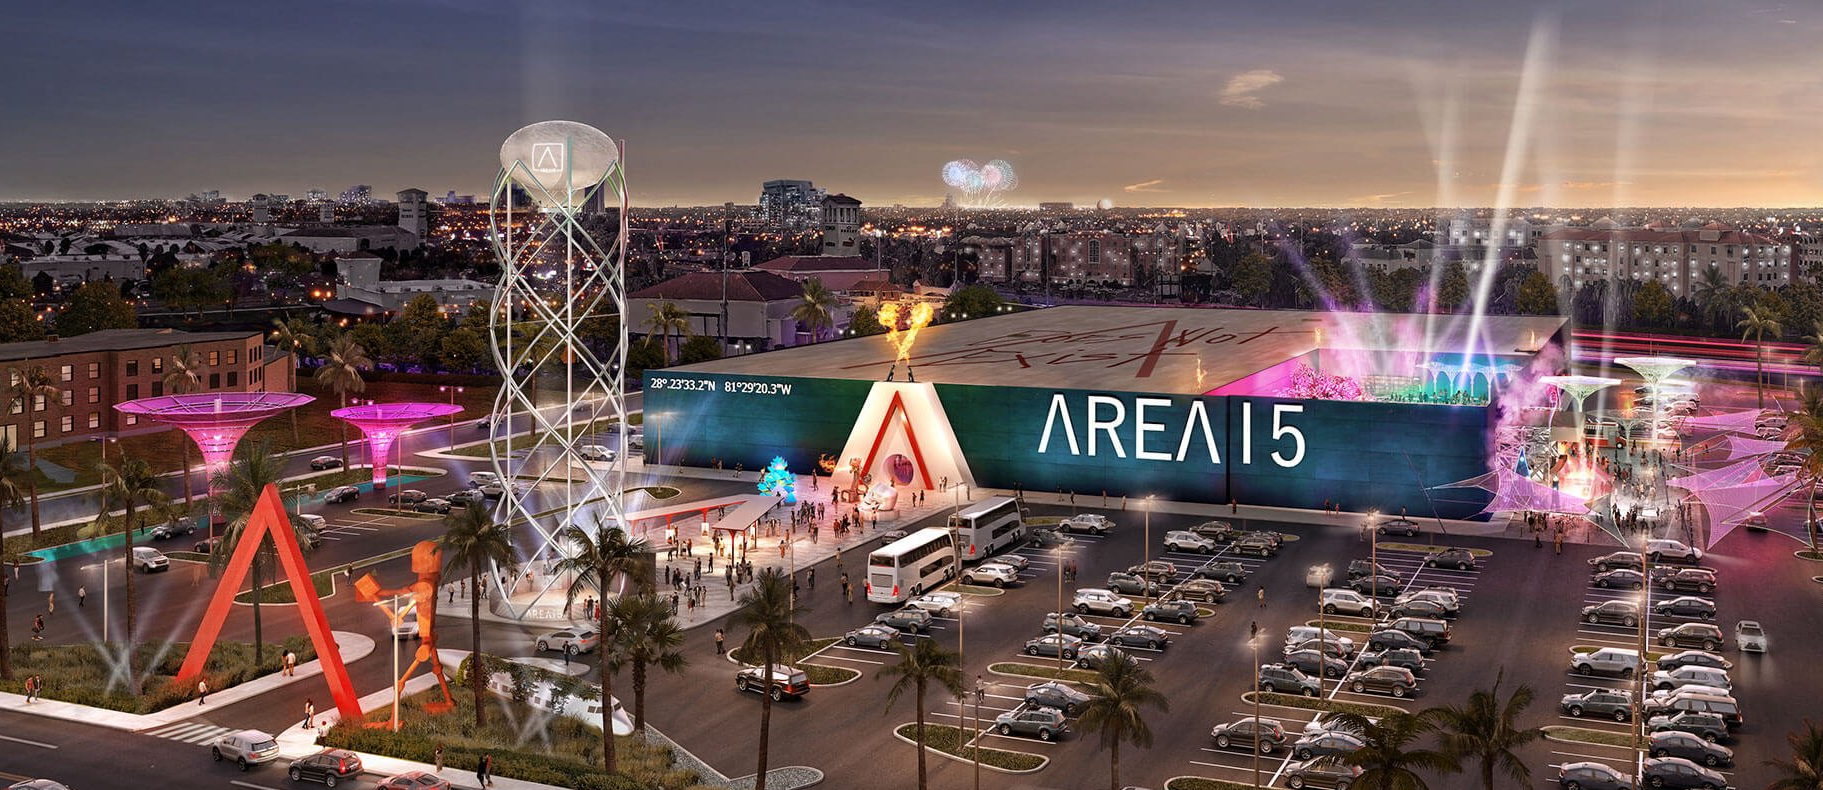 AREA15 To Bring Award-Winning Experiential Art And Entertainment District To Orlando